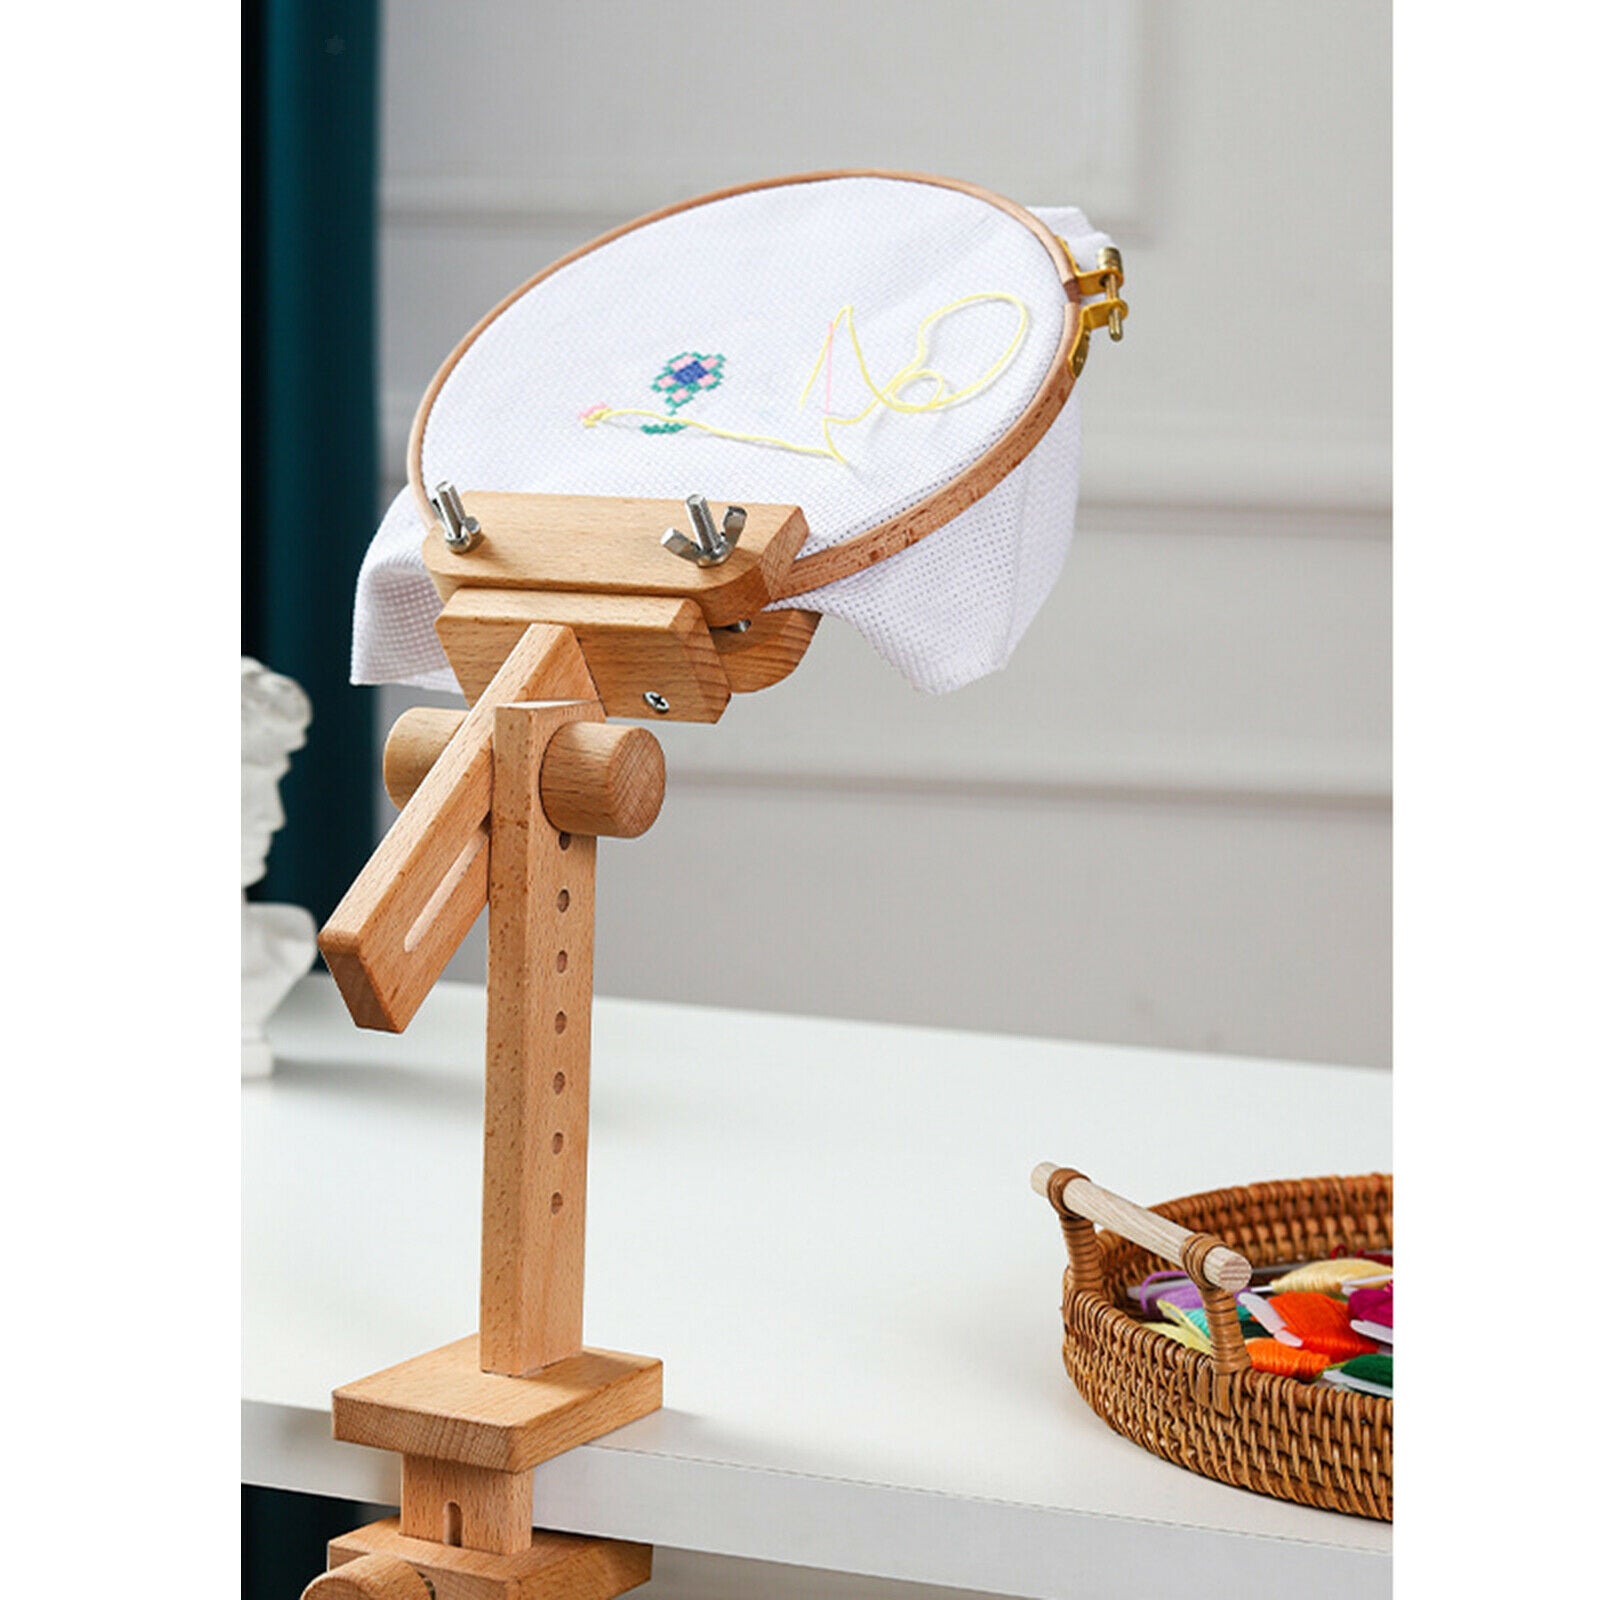 Rotating Cross Stitch Frame Clamps Lap Stand Embroidery Holder Stitchwork